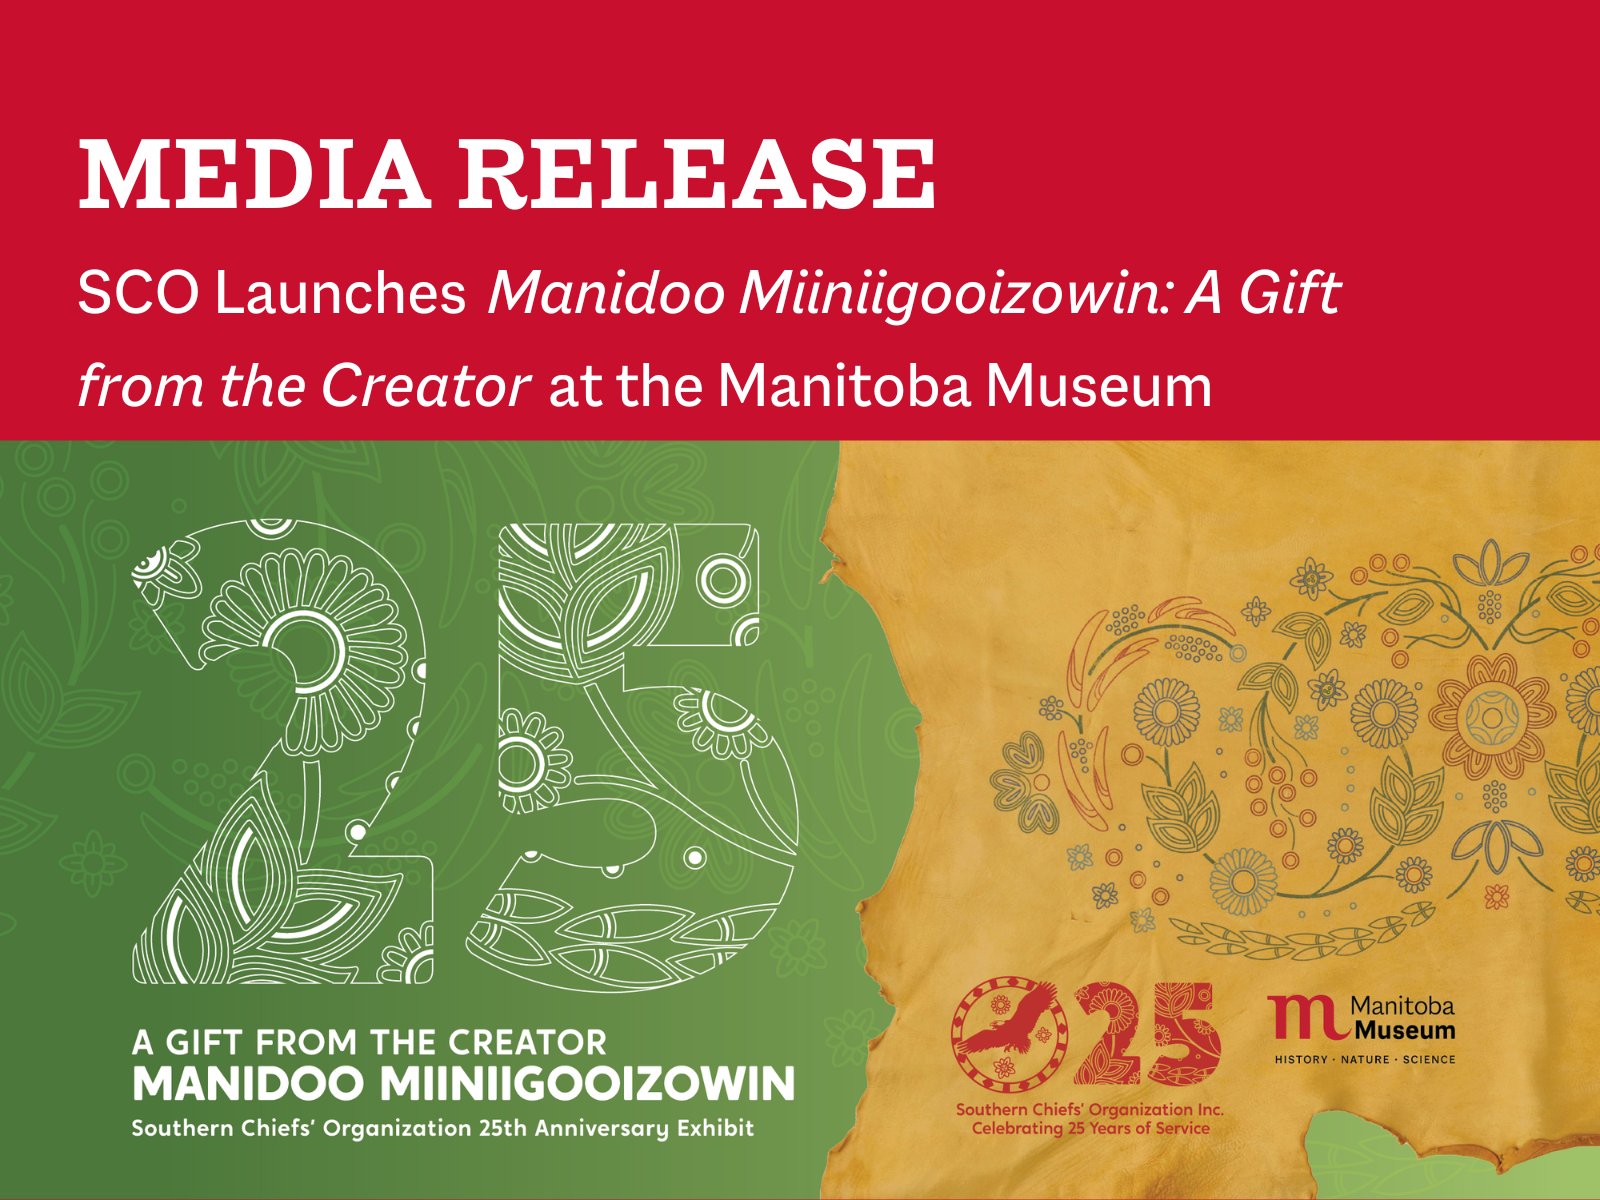 SCO Launches ‘Manidoo Miiniigooizowin: A Gift from the Creator’ at the Manitoba Museum